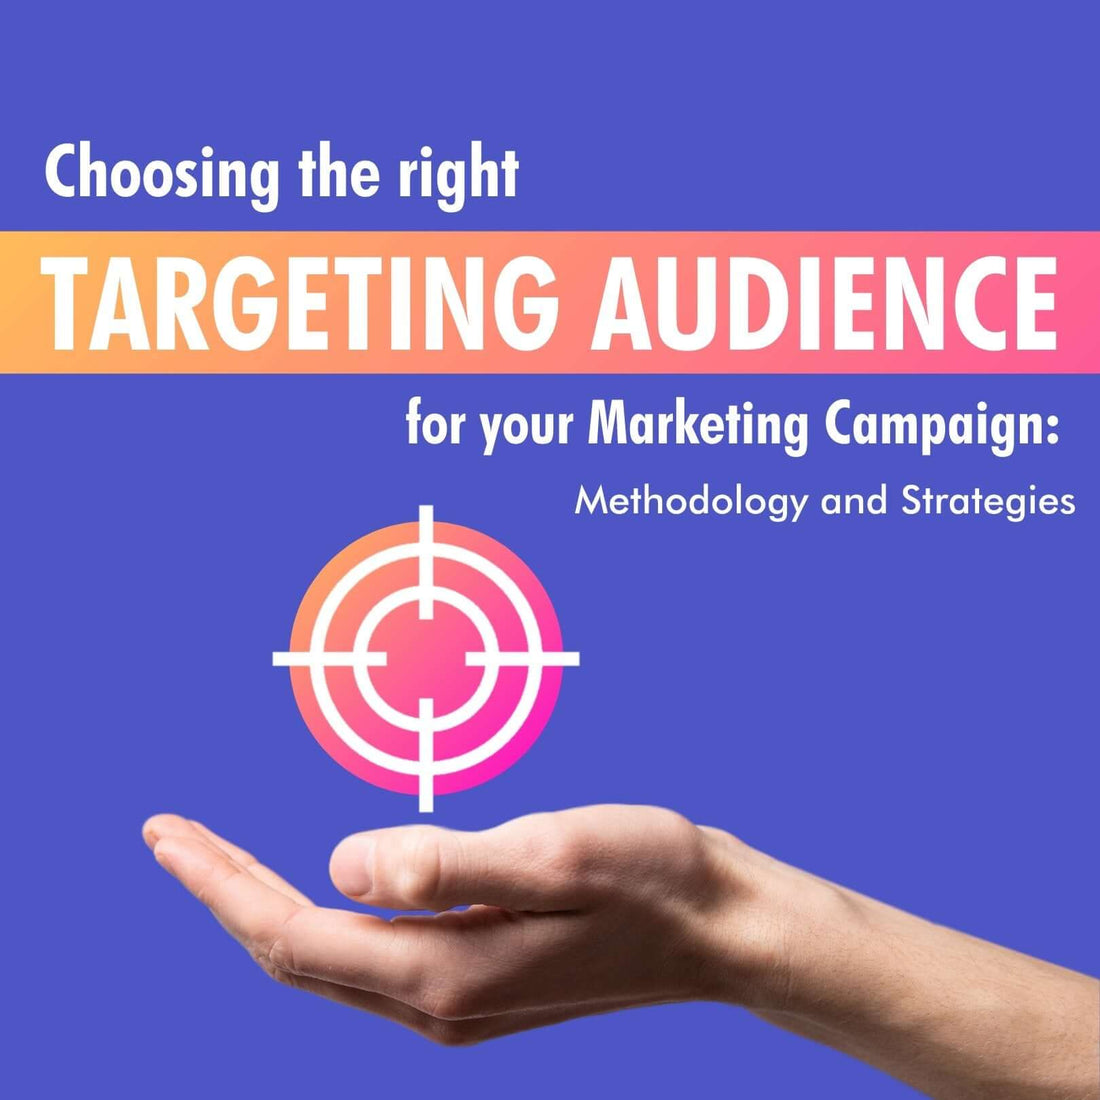 How to choose the right targeting audience for your marketing campaign